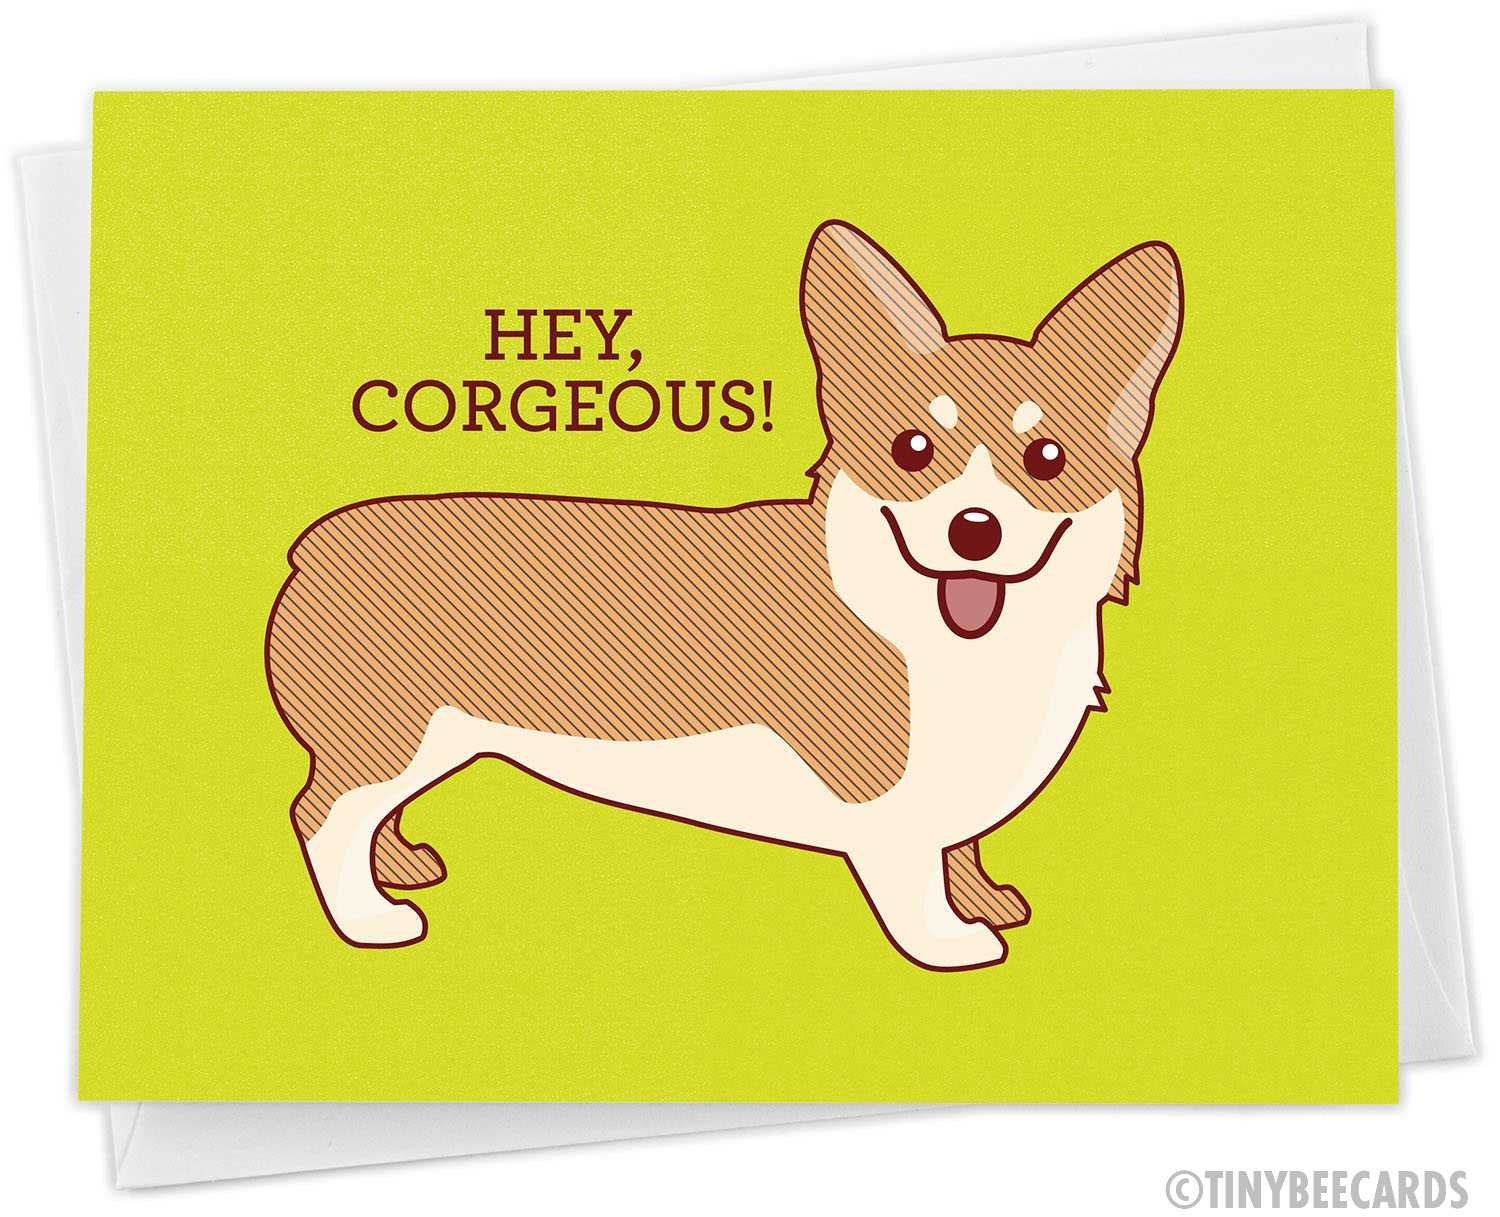 Funny Anniversary or Love Card "Hey Corgeous!"